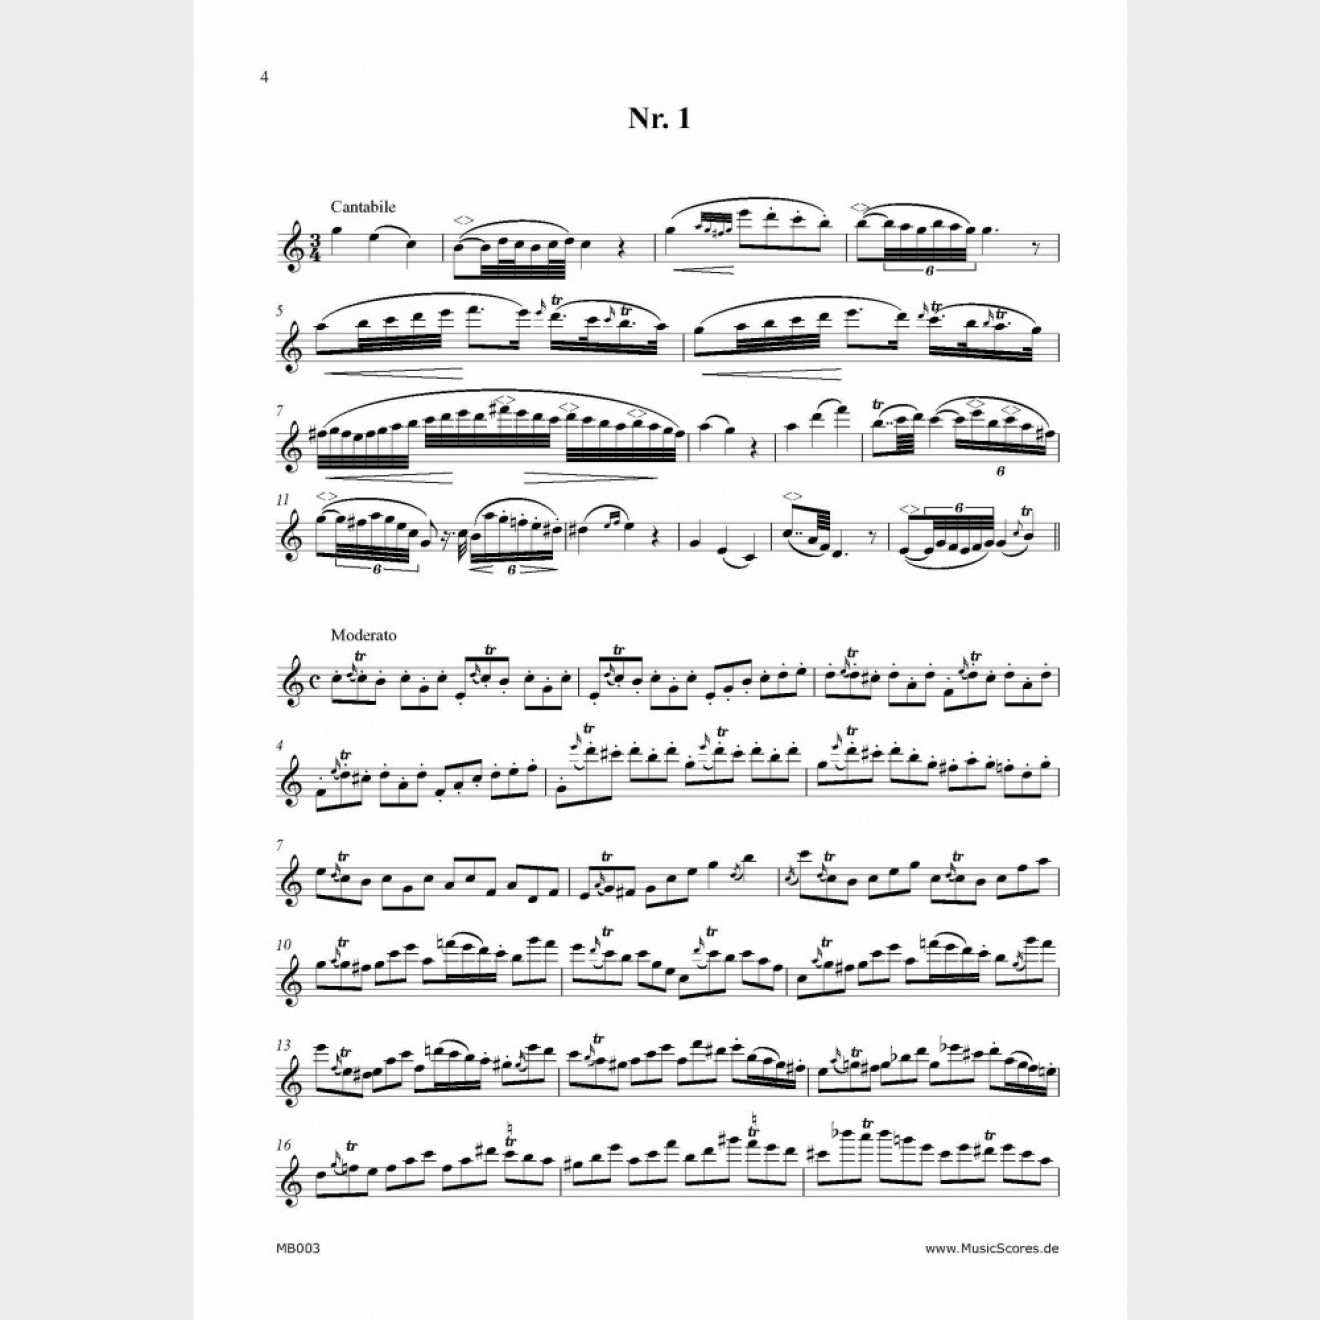 12 Caprices for flute (Pierre Rode)